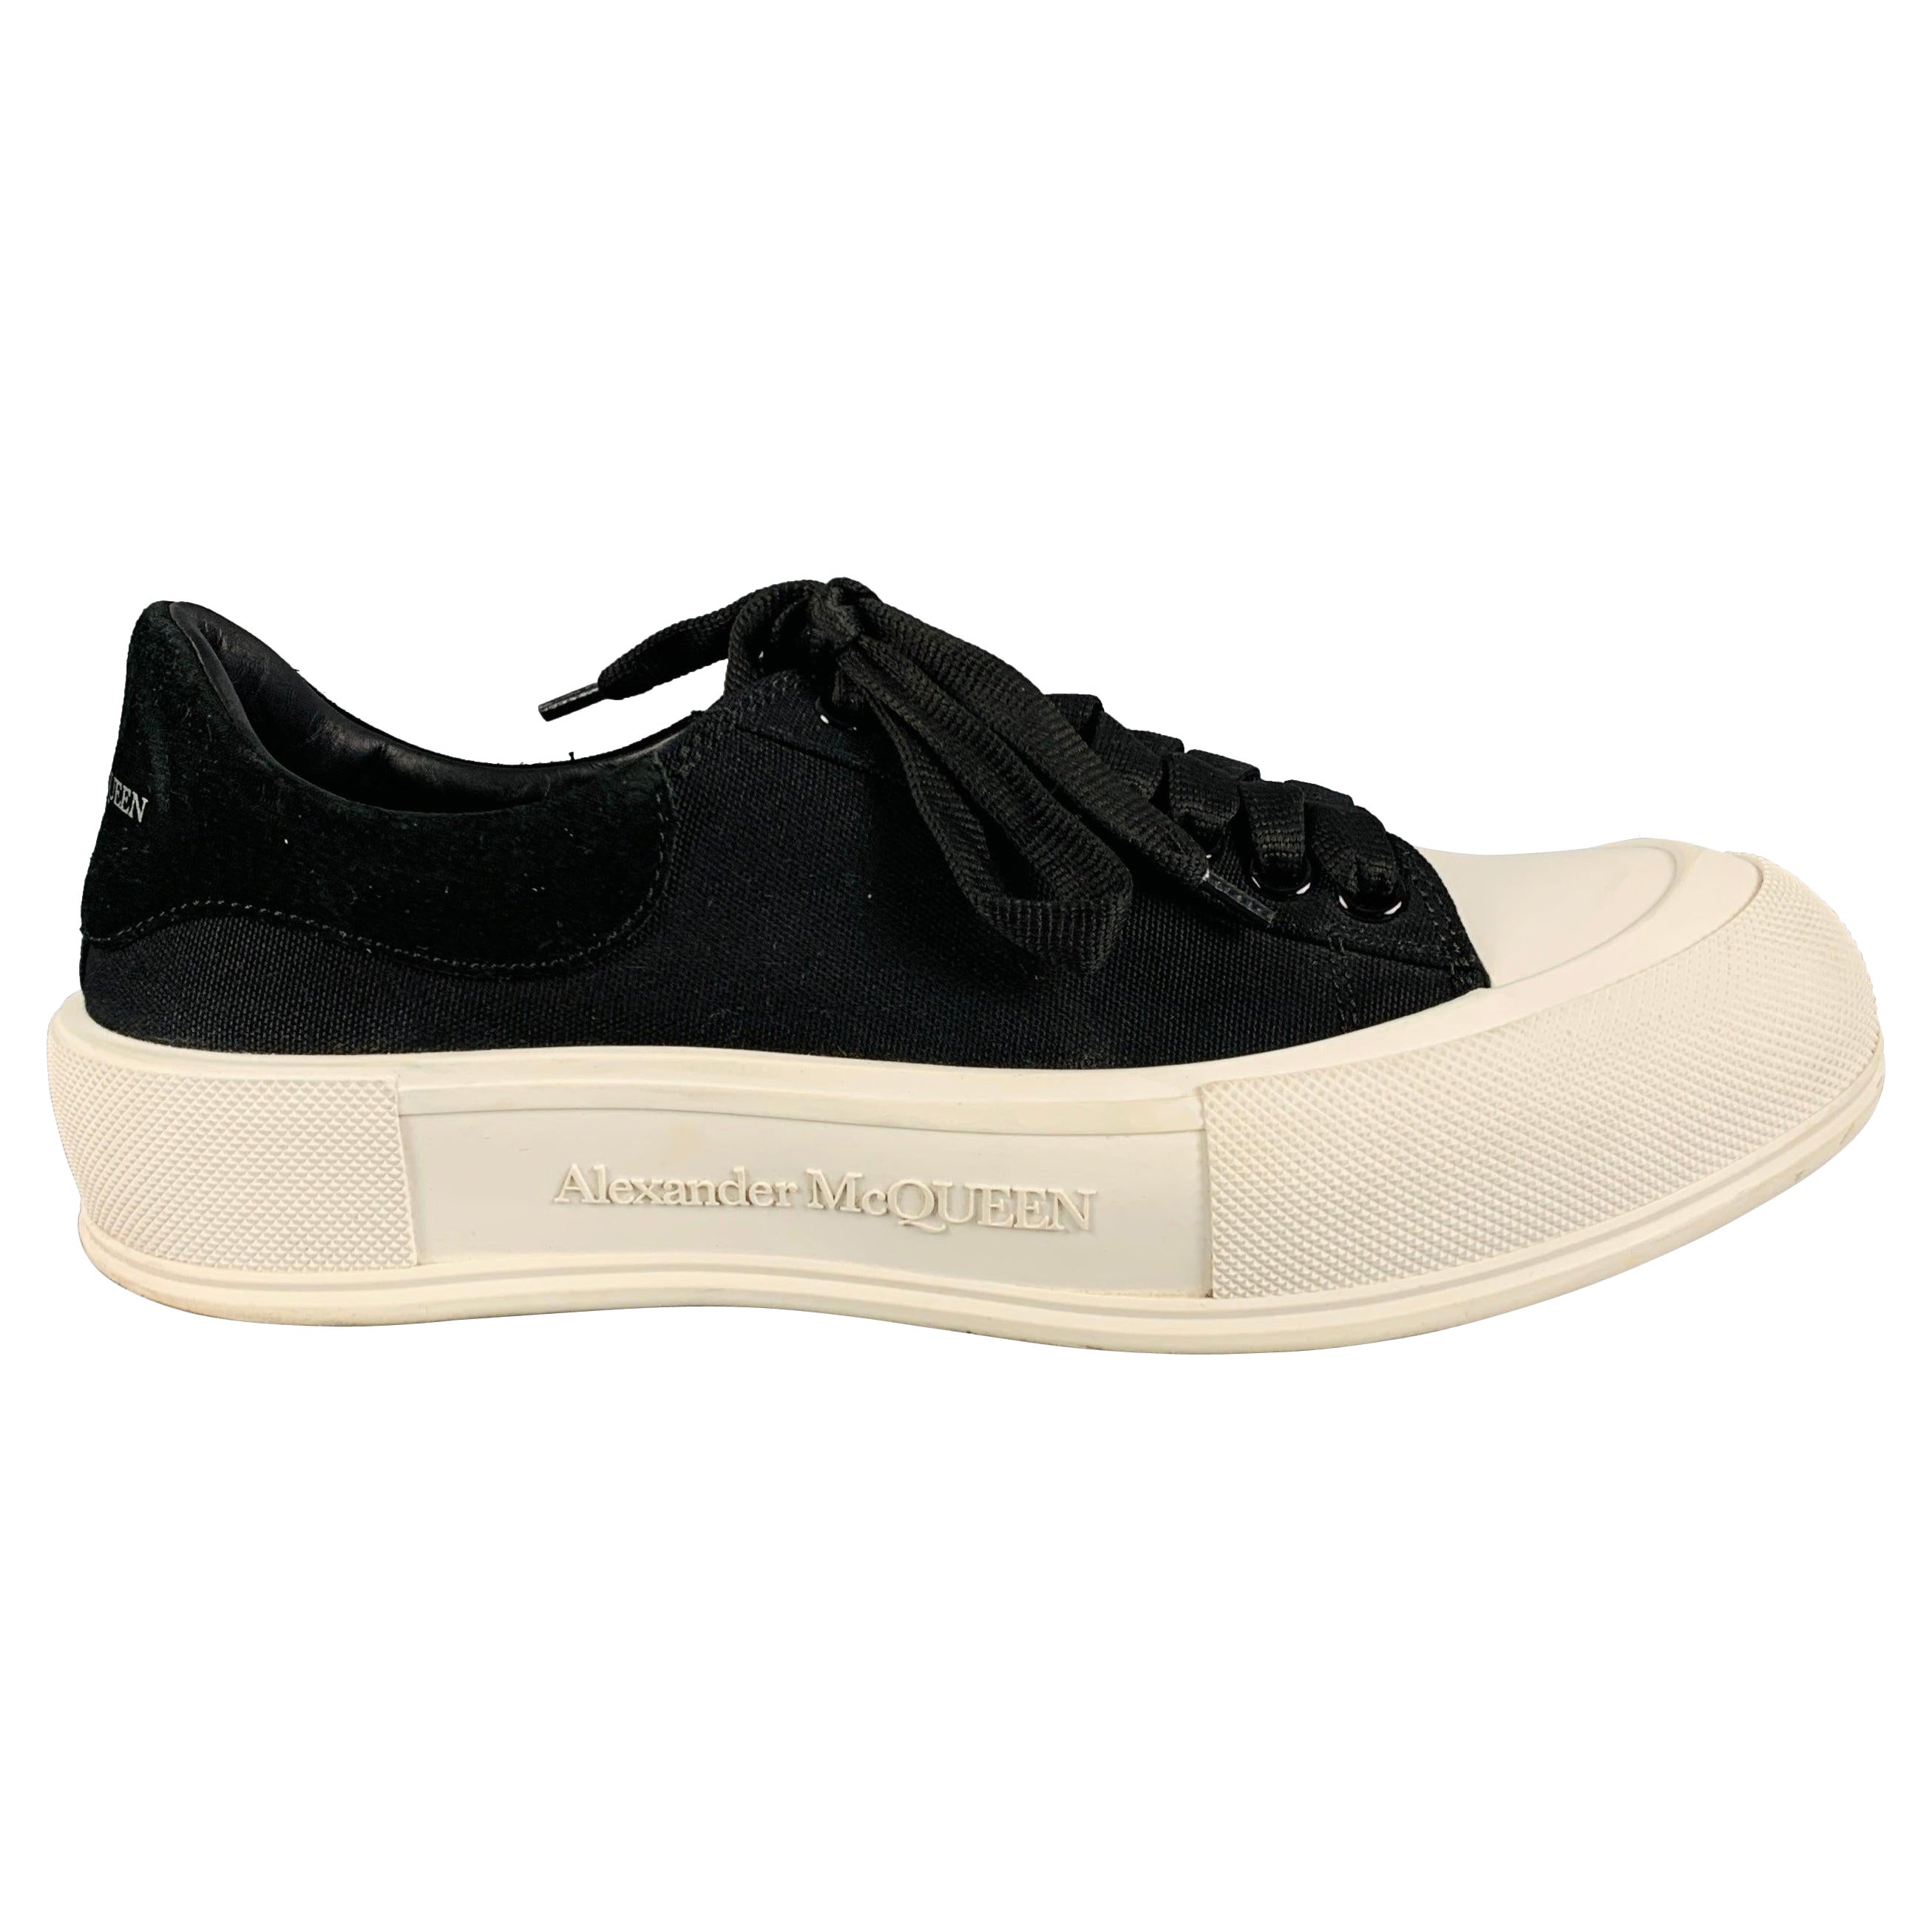 ALEXANDER MCQUEEN Size 10 Black White Two Toned Canvas Lace-Up Sneakers